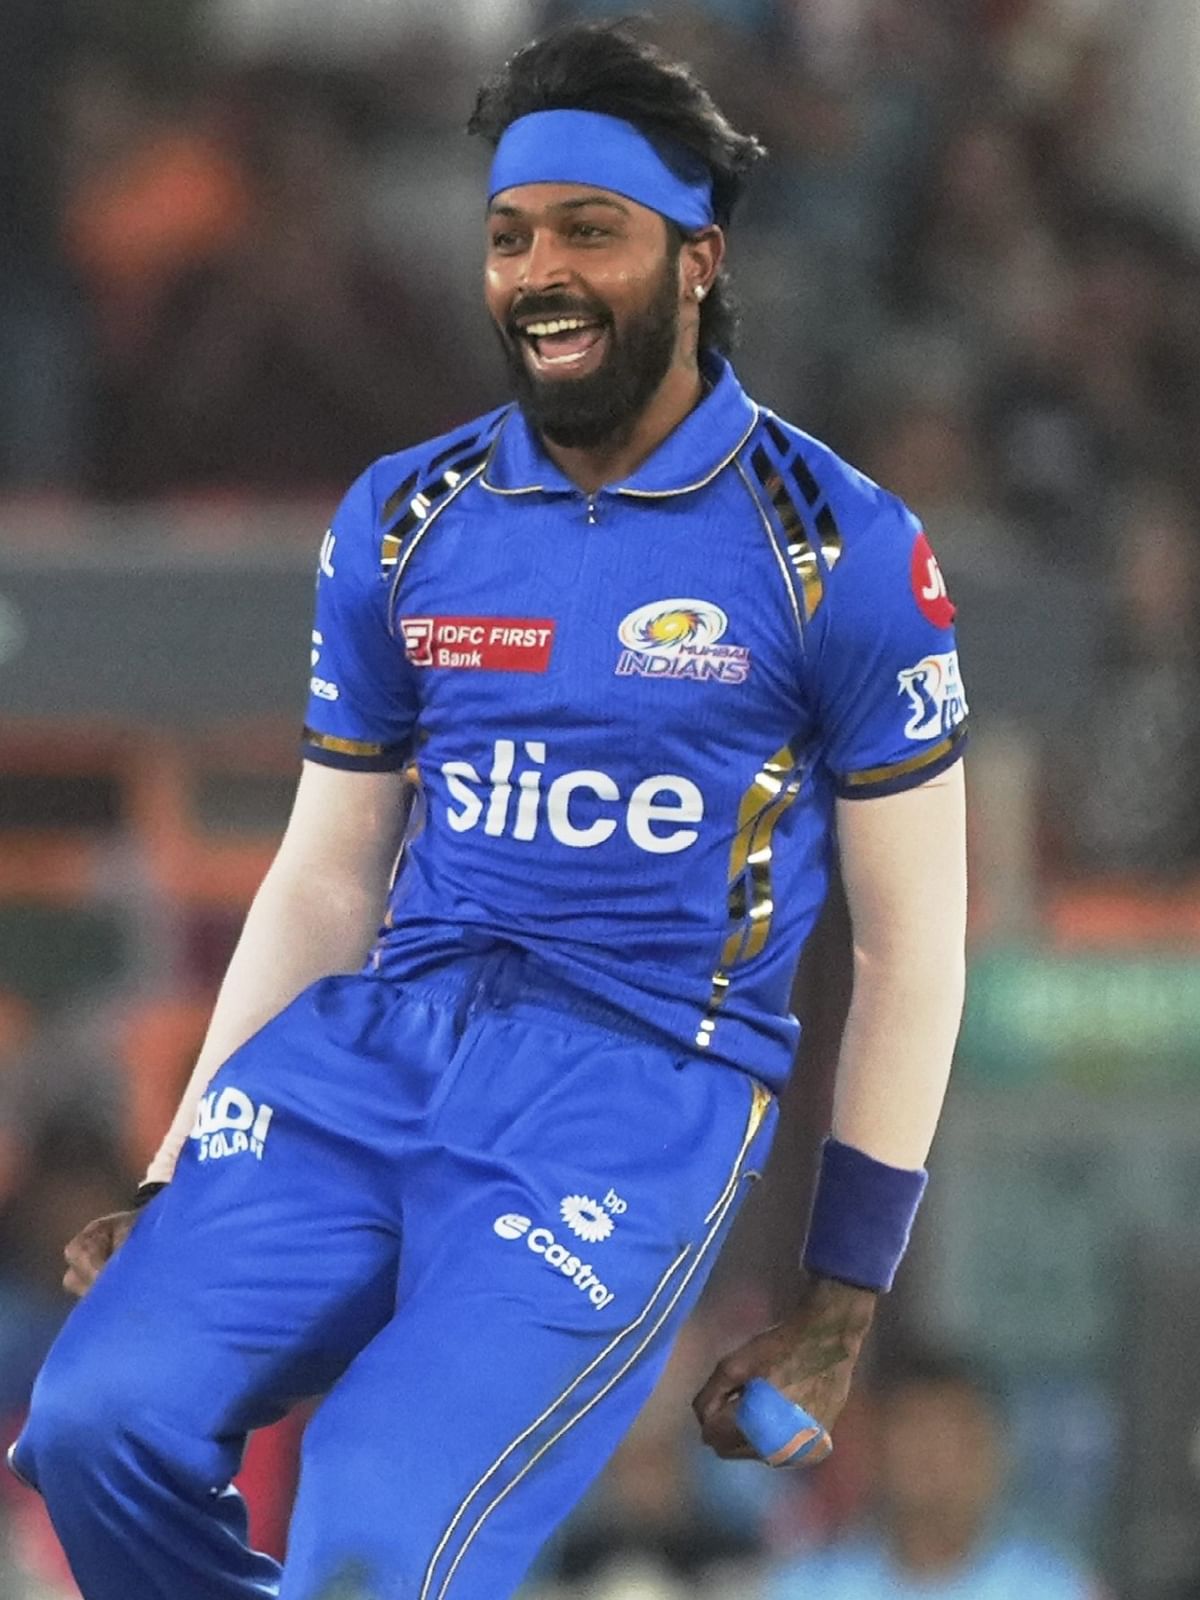 While the MI bowlers were smashed all over the ground, MI skipper Hardik Pandya was one of the economical bowlers for the team. He conceded runs at 11.5 runs per over and picked one wicket.